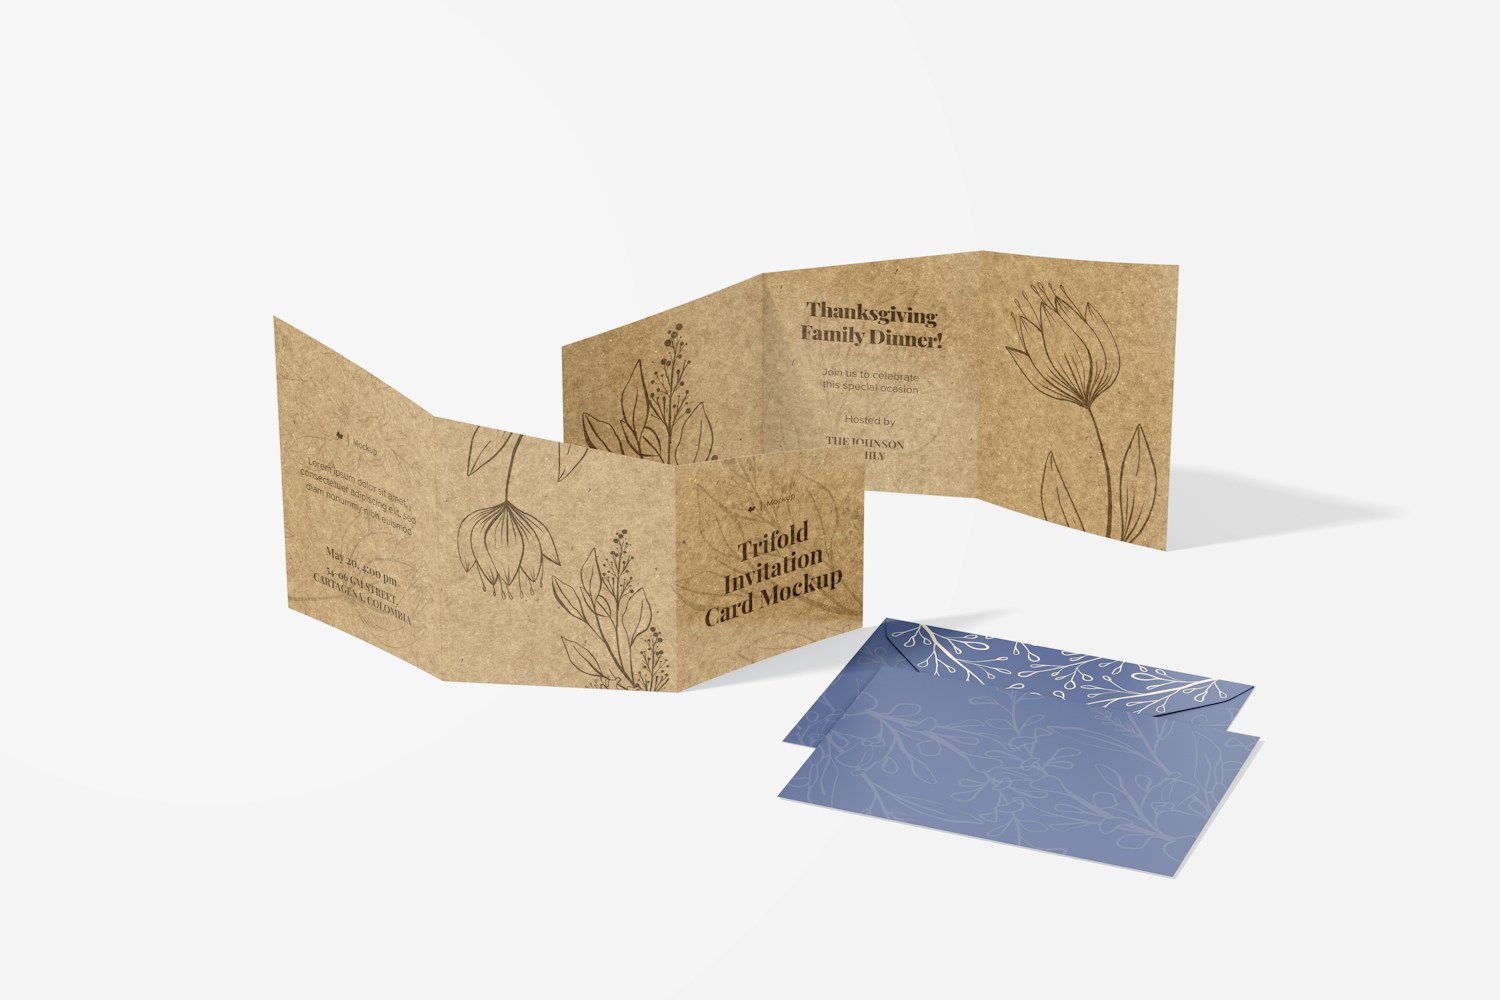 Trifold Invitation Card Mockup, Front View